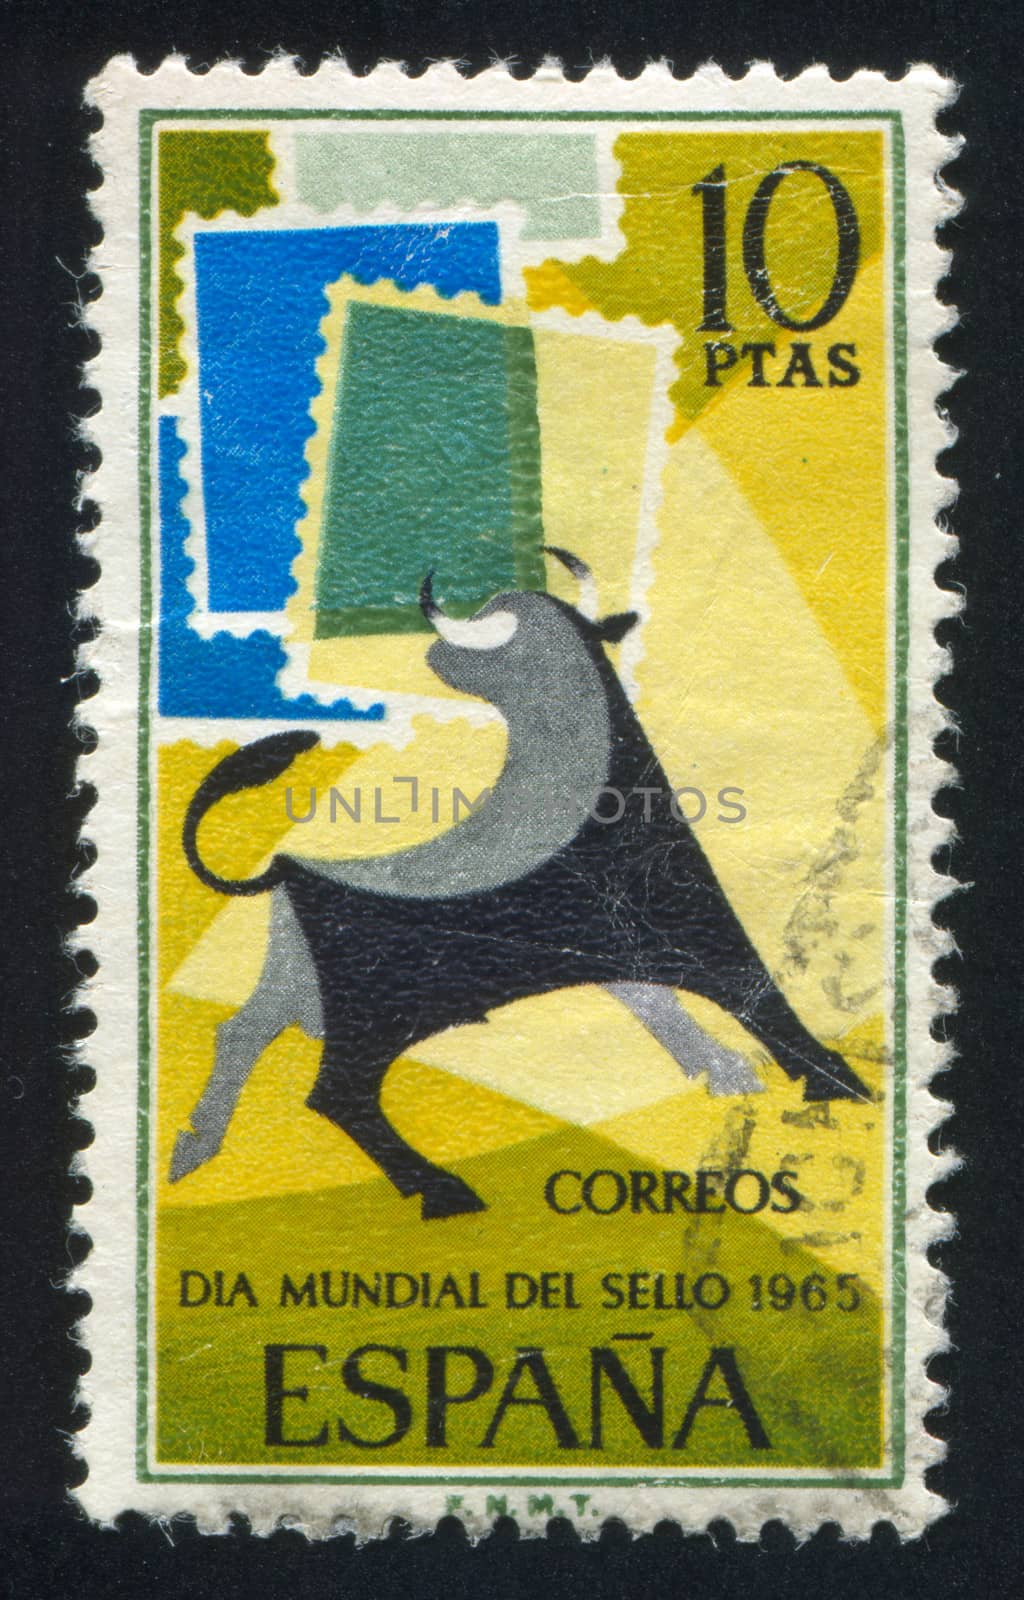 SPAIN - CIRCA 1965: stamp printed by Spain, shows Bull and Symbolic Stamps, circa 1965